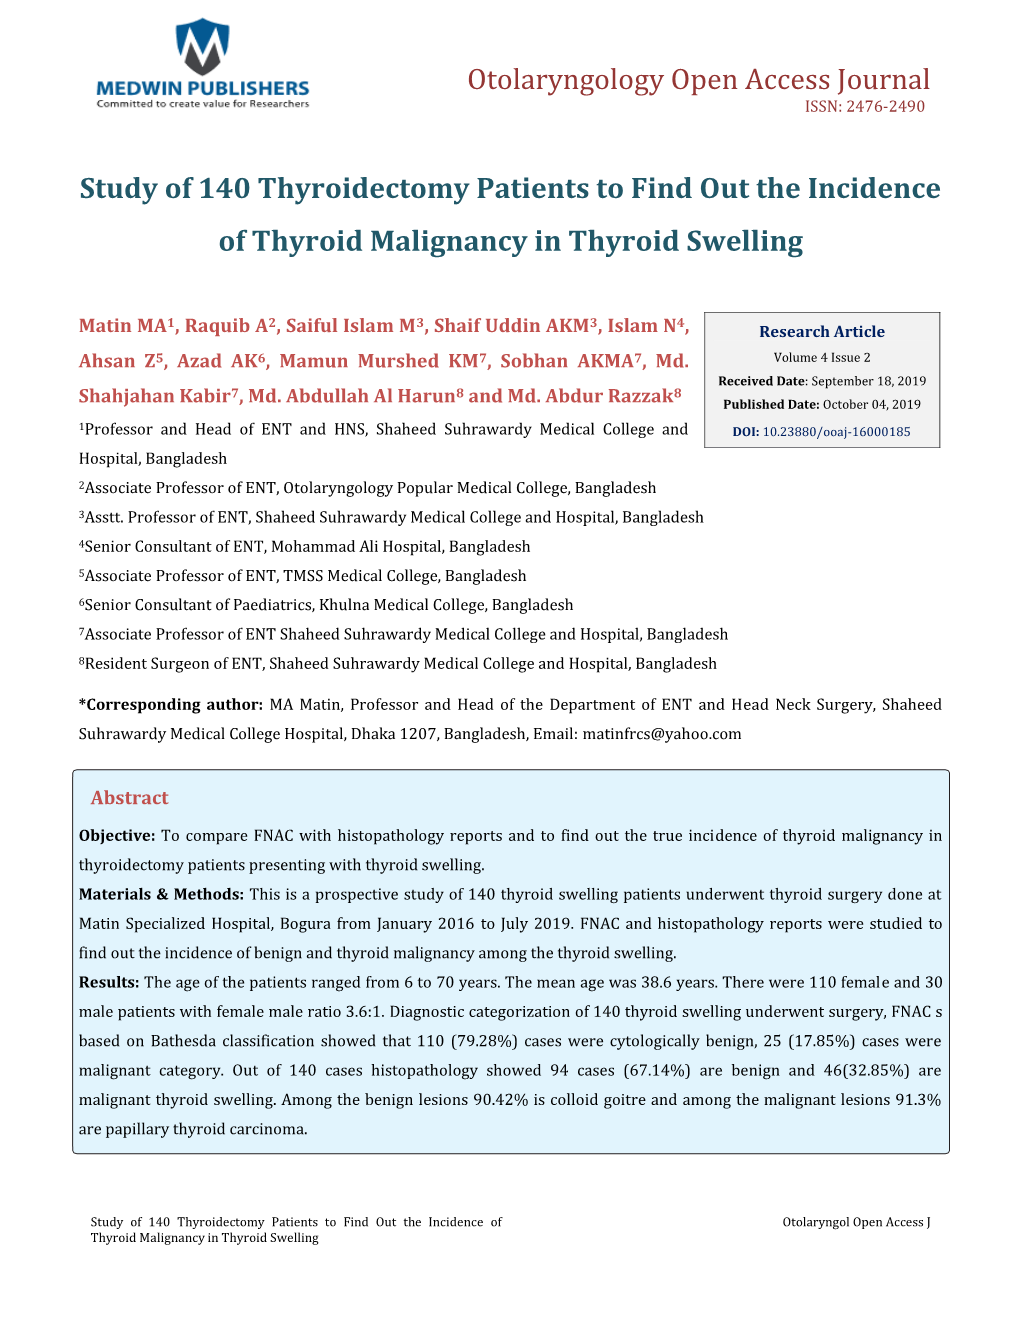 Study of 140 Thyroidectomy Patients to Find out the Incidence of Thyroid Malignancy in Thyroid Swelling